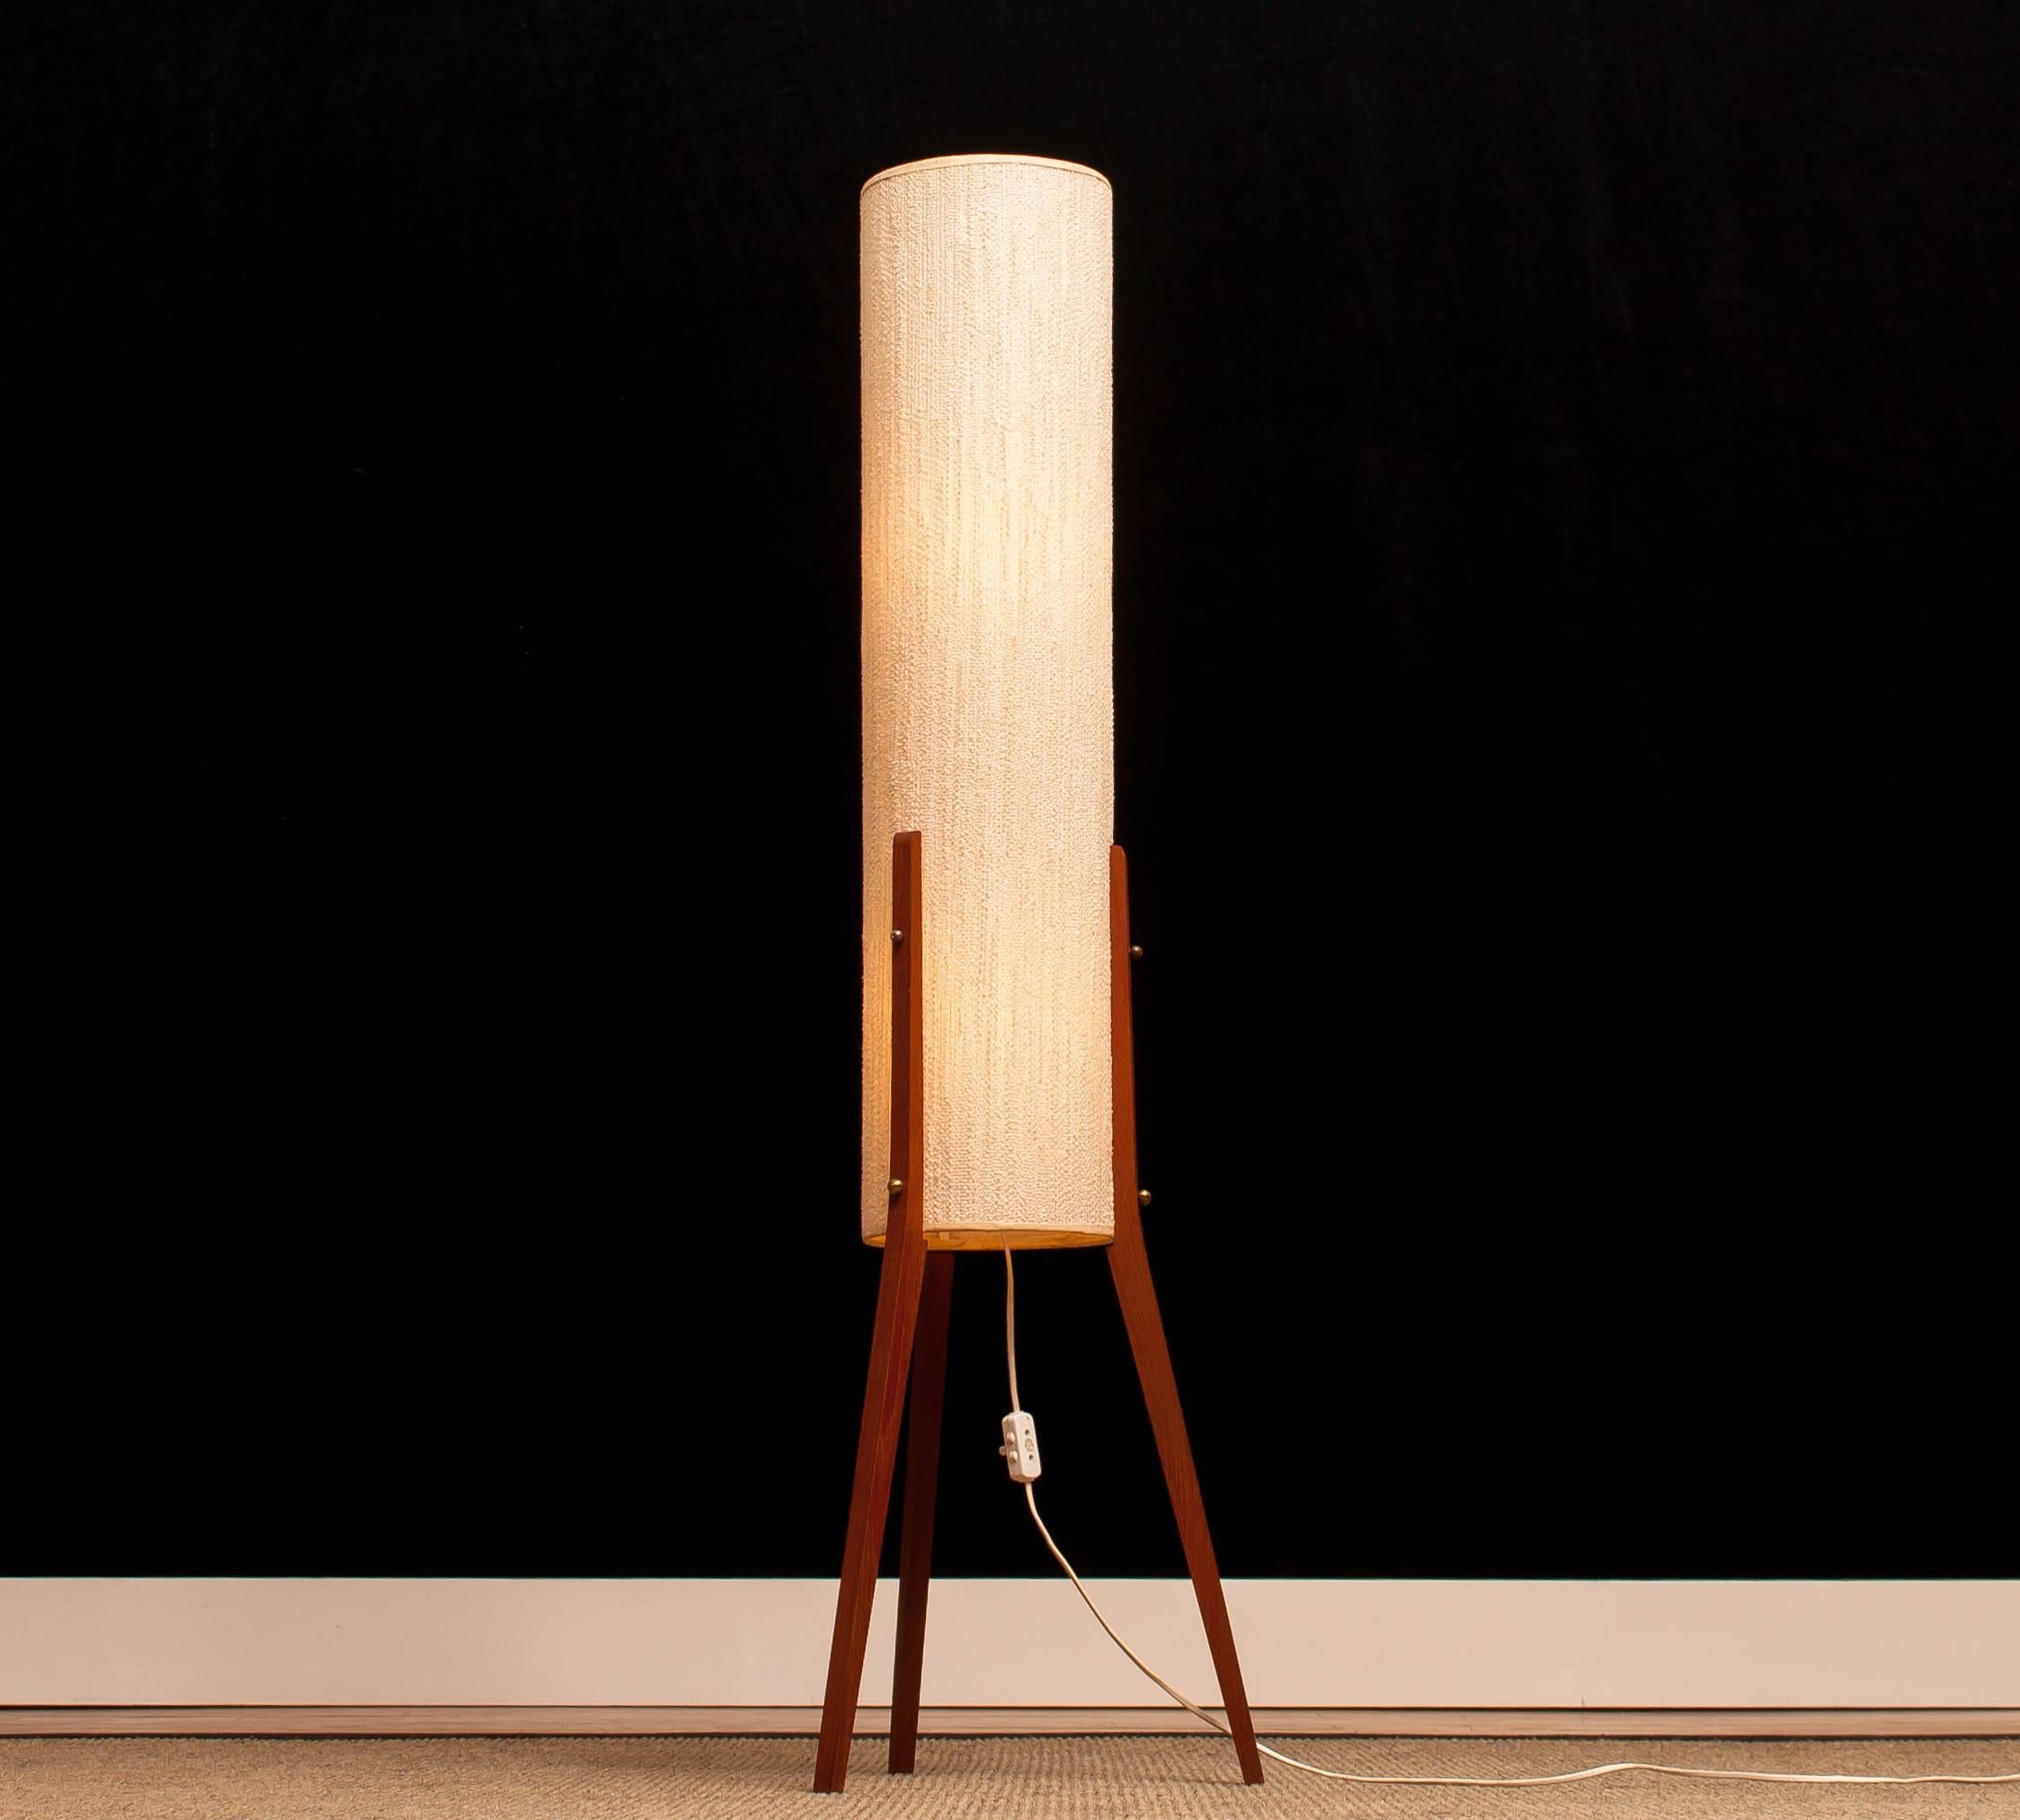 Wonderful large floor lamp made by Fog & Mørup Denmark.
This lamp has a shade made of chenille on a teak stand.
It is in a beautiful condition.
Period 1960s
Dimensions: H 120 cm, ø 35 cm.